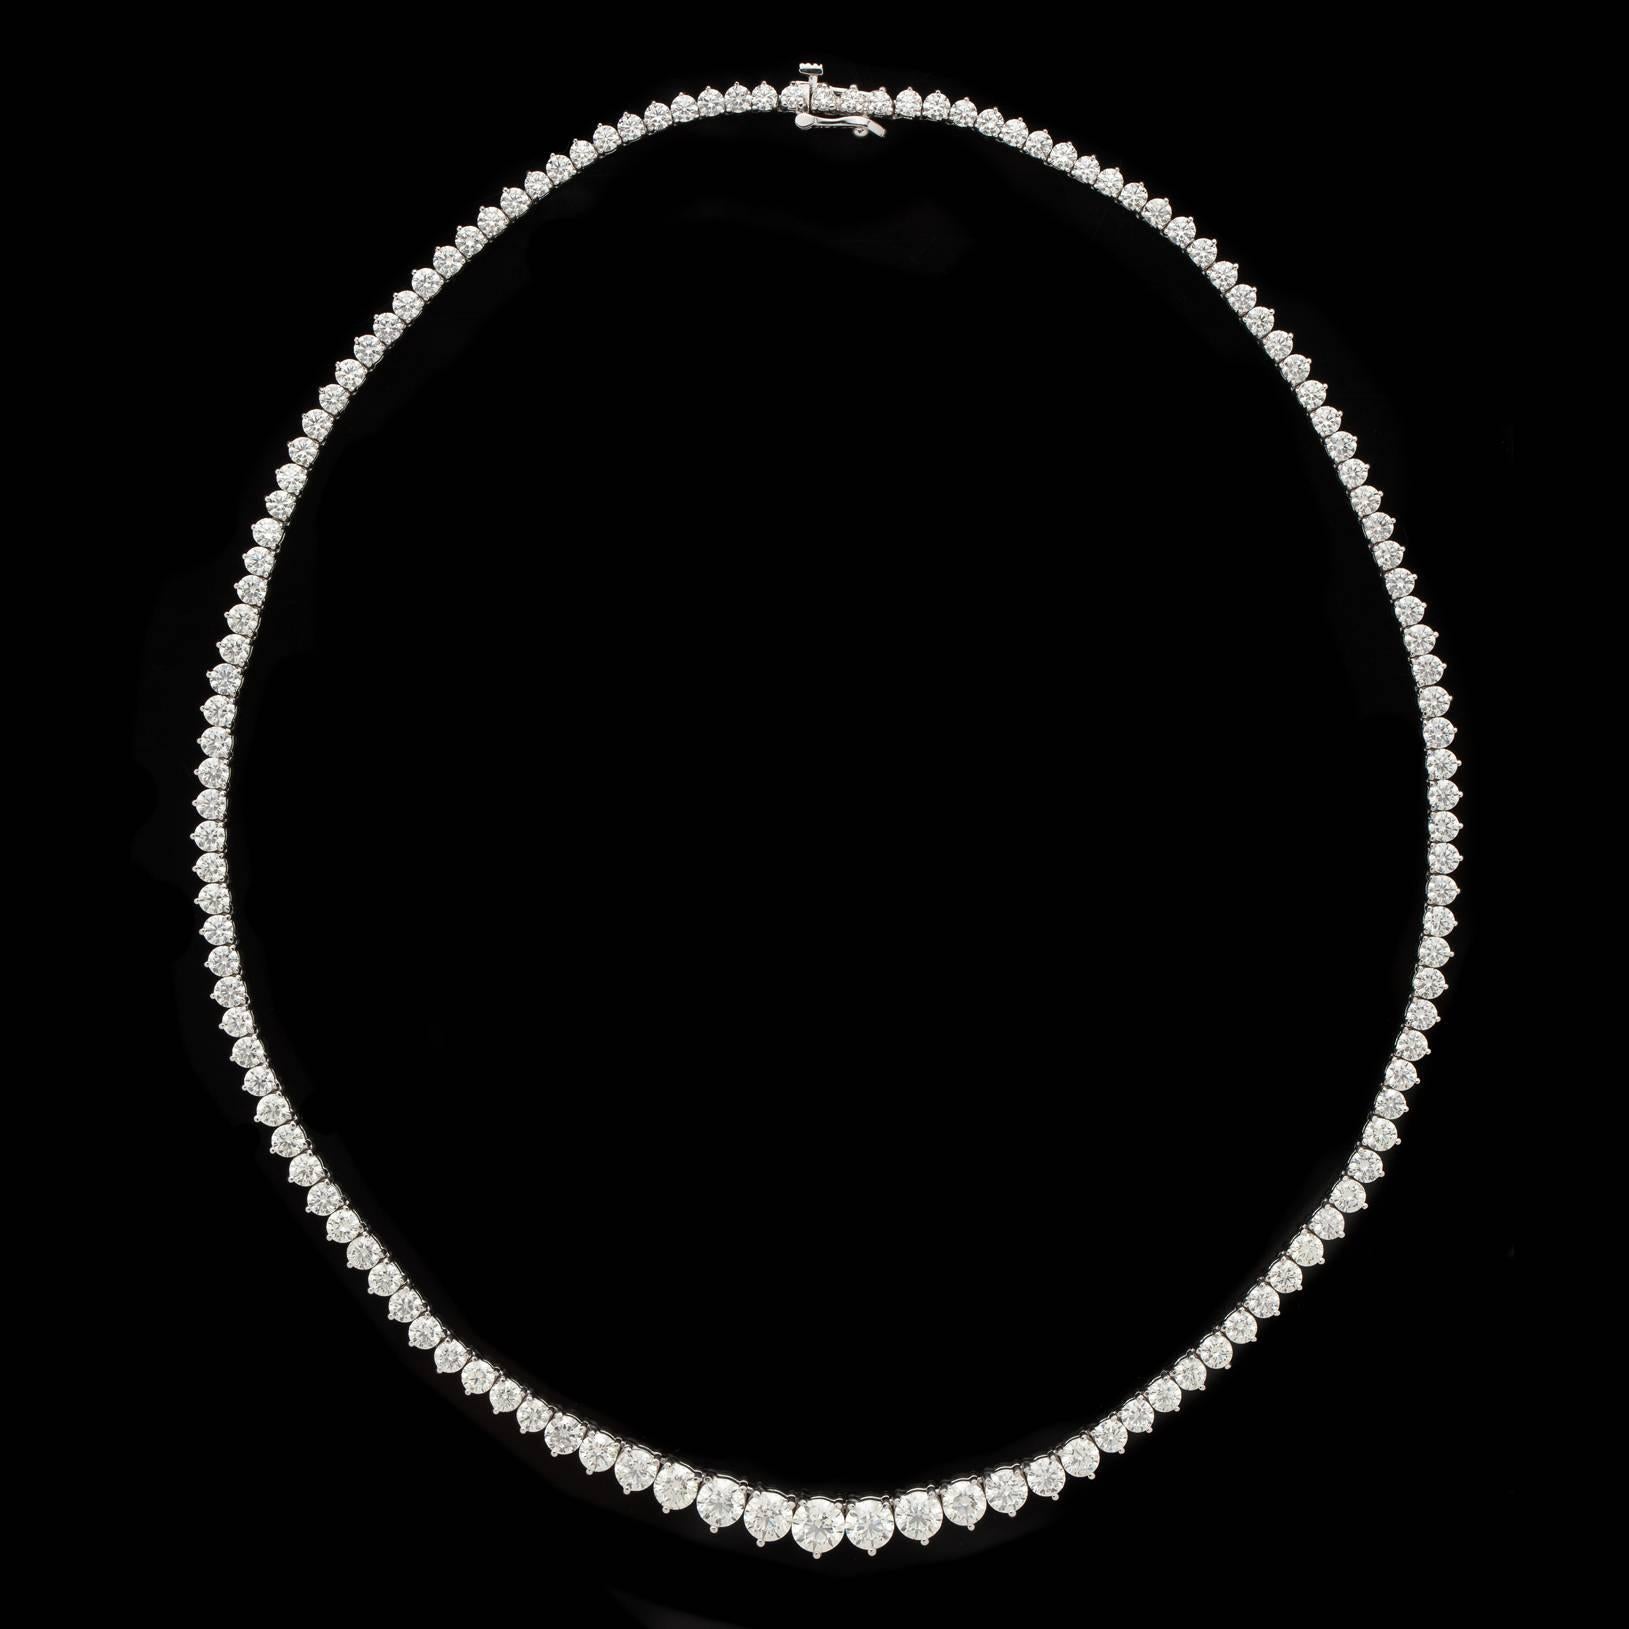 Sparkling Graduated Diamond Line Necklace of Round Brilliant Cut White Diamonds set in 18Kt White Gold totals 23.93 carats. Length is 18 inches, and weighs 41.7 grams total.